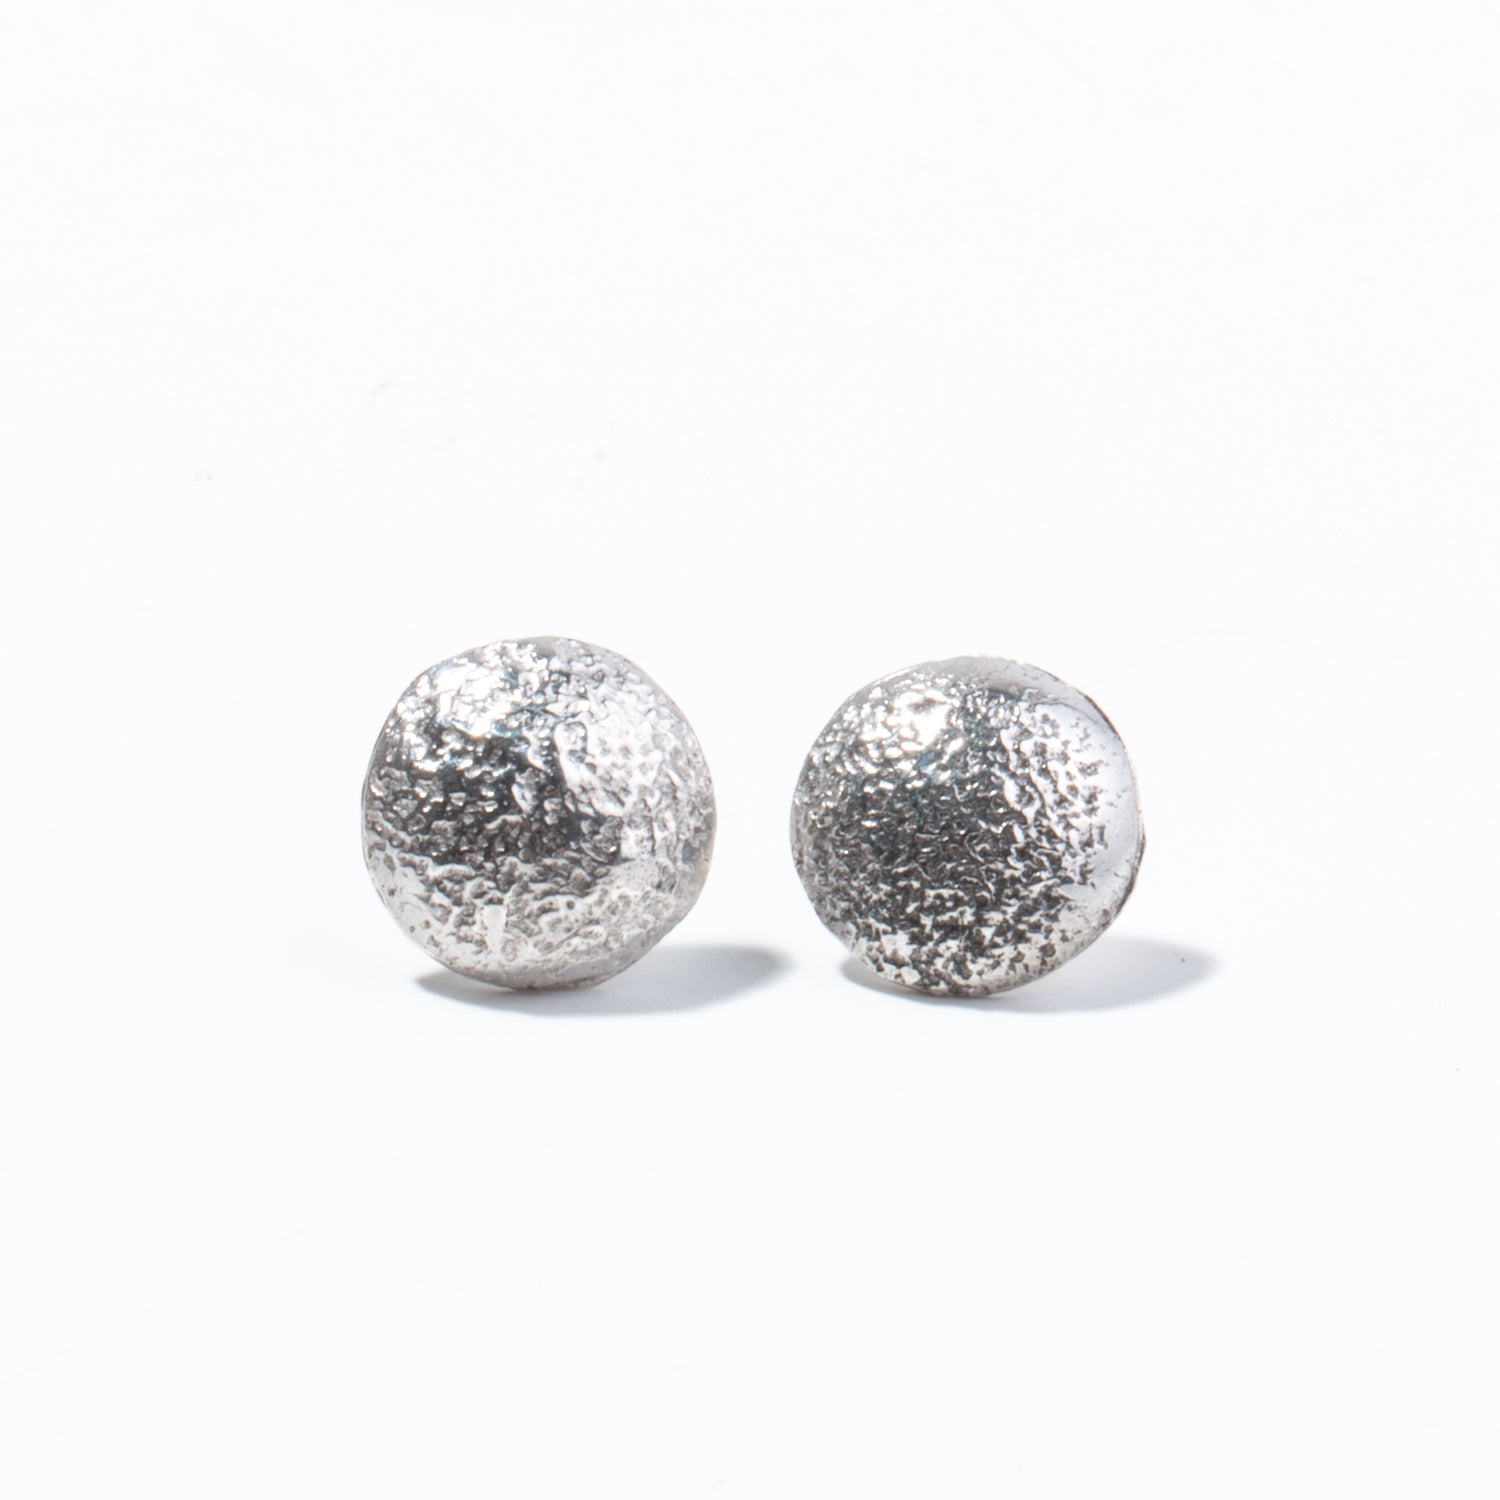 Textured Silver Dome Earrings (by Mildred Parkhurst)